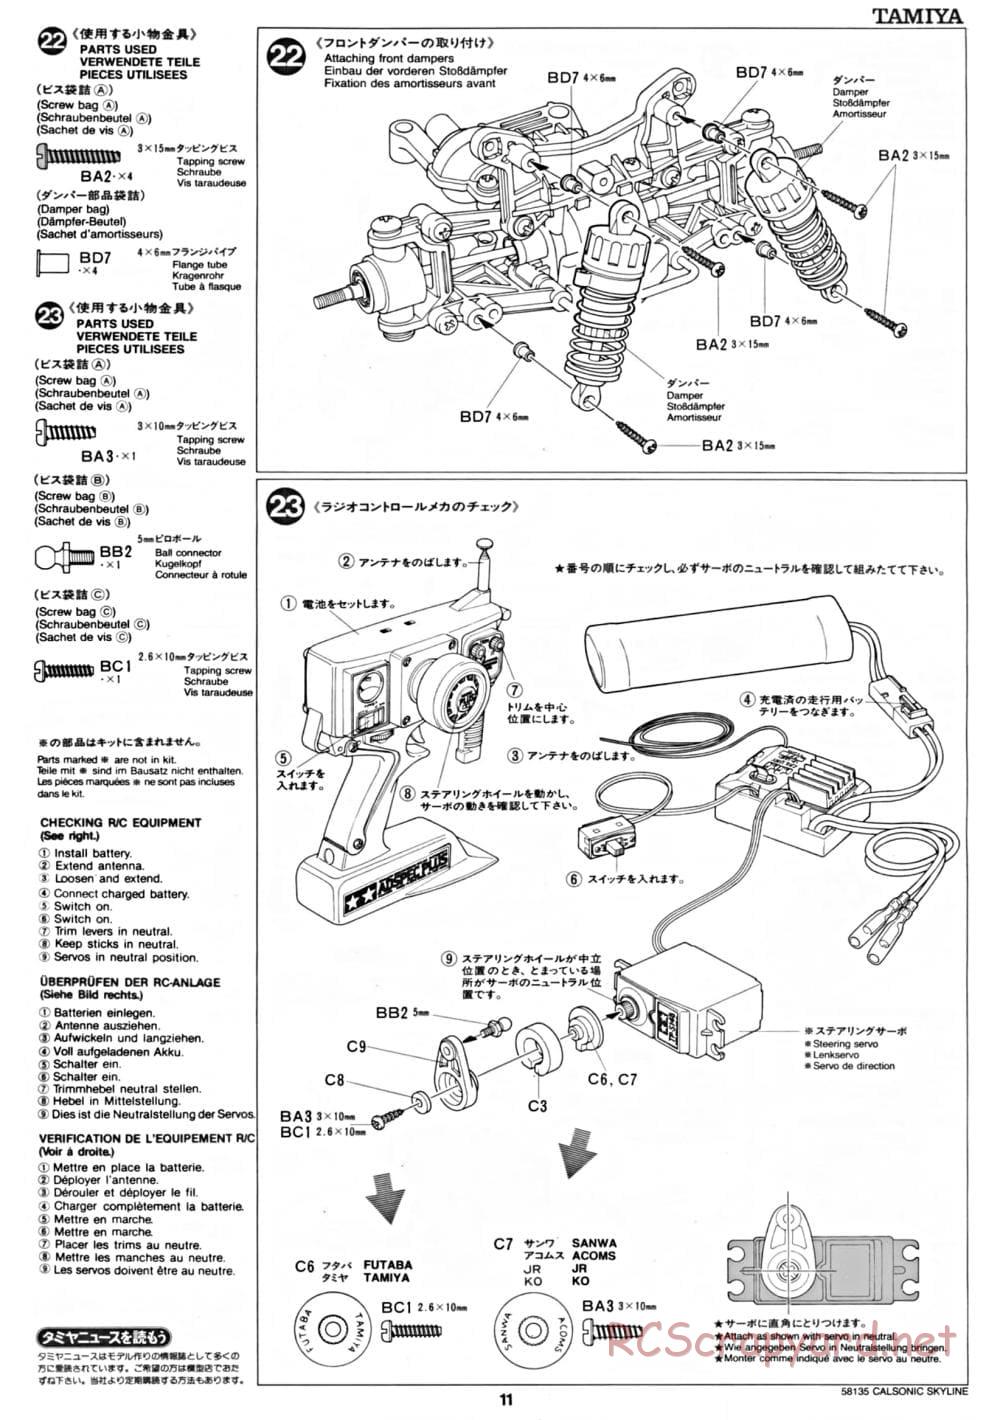 Tamiya - Calsonic Skyline GT-R Gr.A - TA-02 Chassis - Manual - Page 11